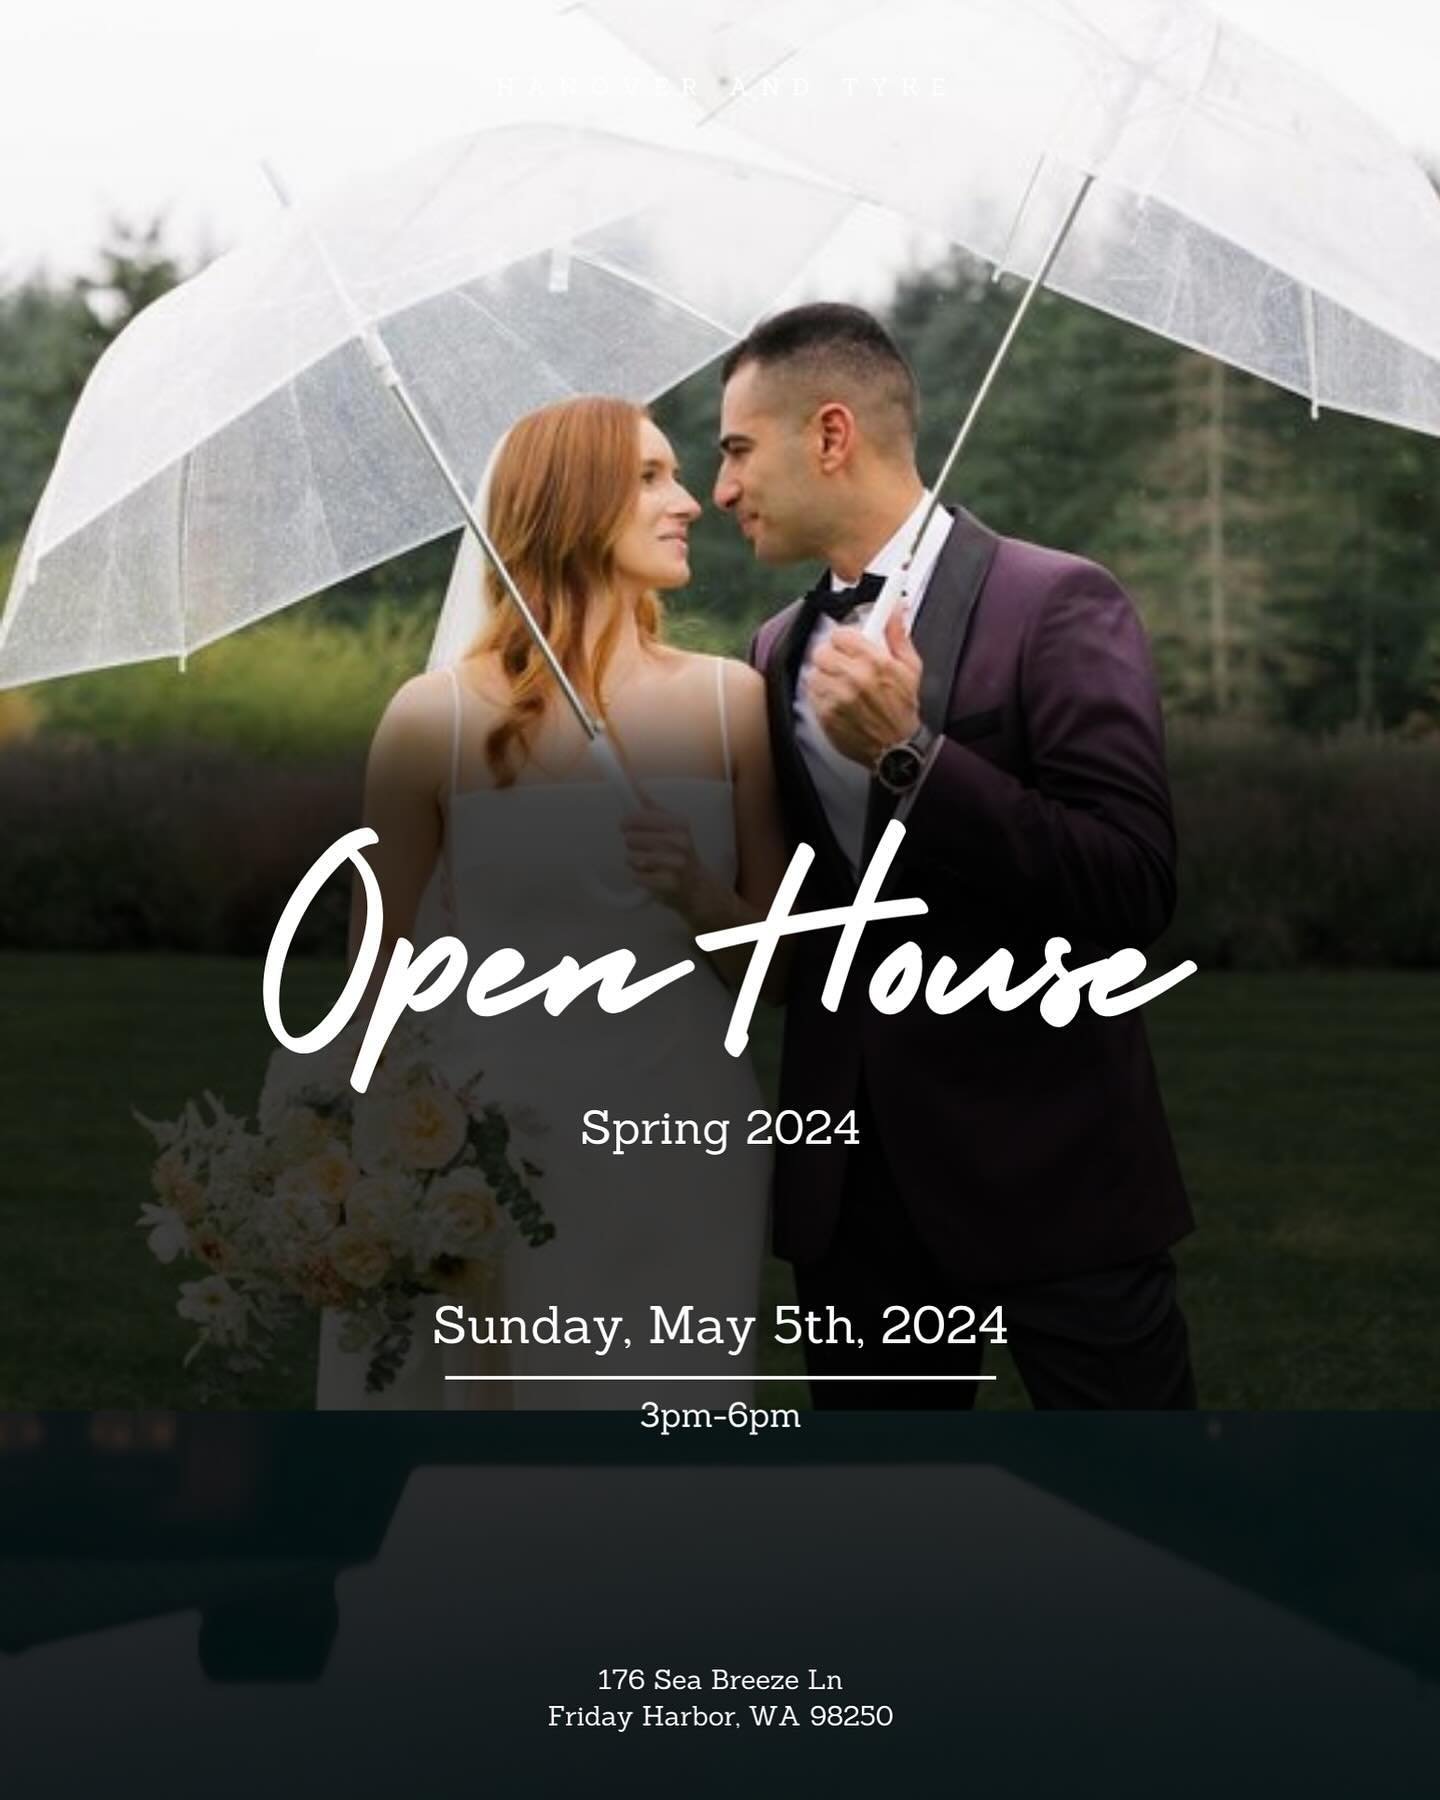 Join us on property May 5th for our Spring Open House! Whether you&rsquo;re already booked with us and want to tackle some of those planning details or are looking to see property for the first time, our Open House is a great chance to see what we ha